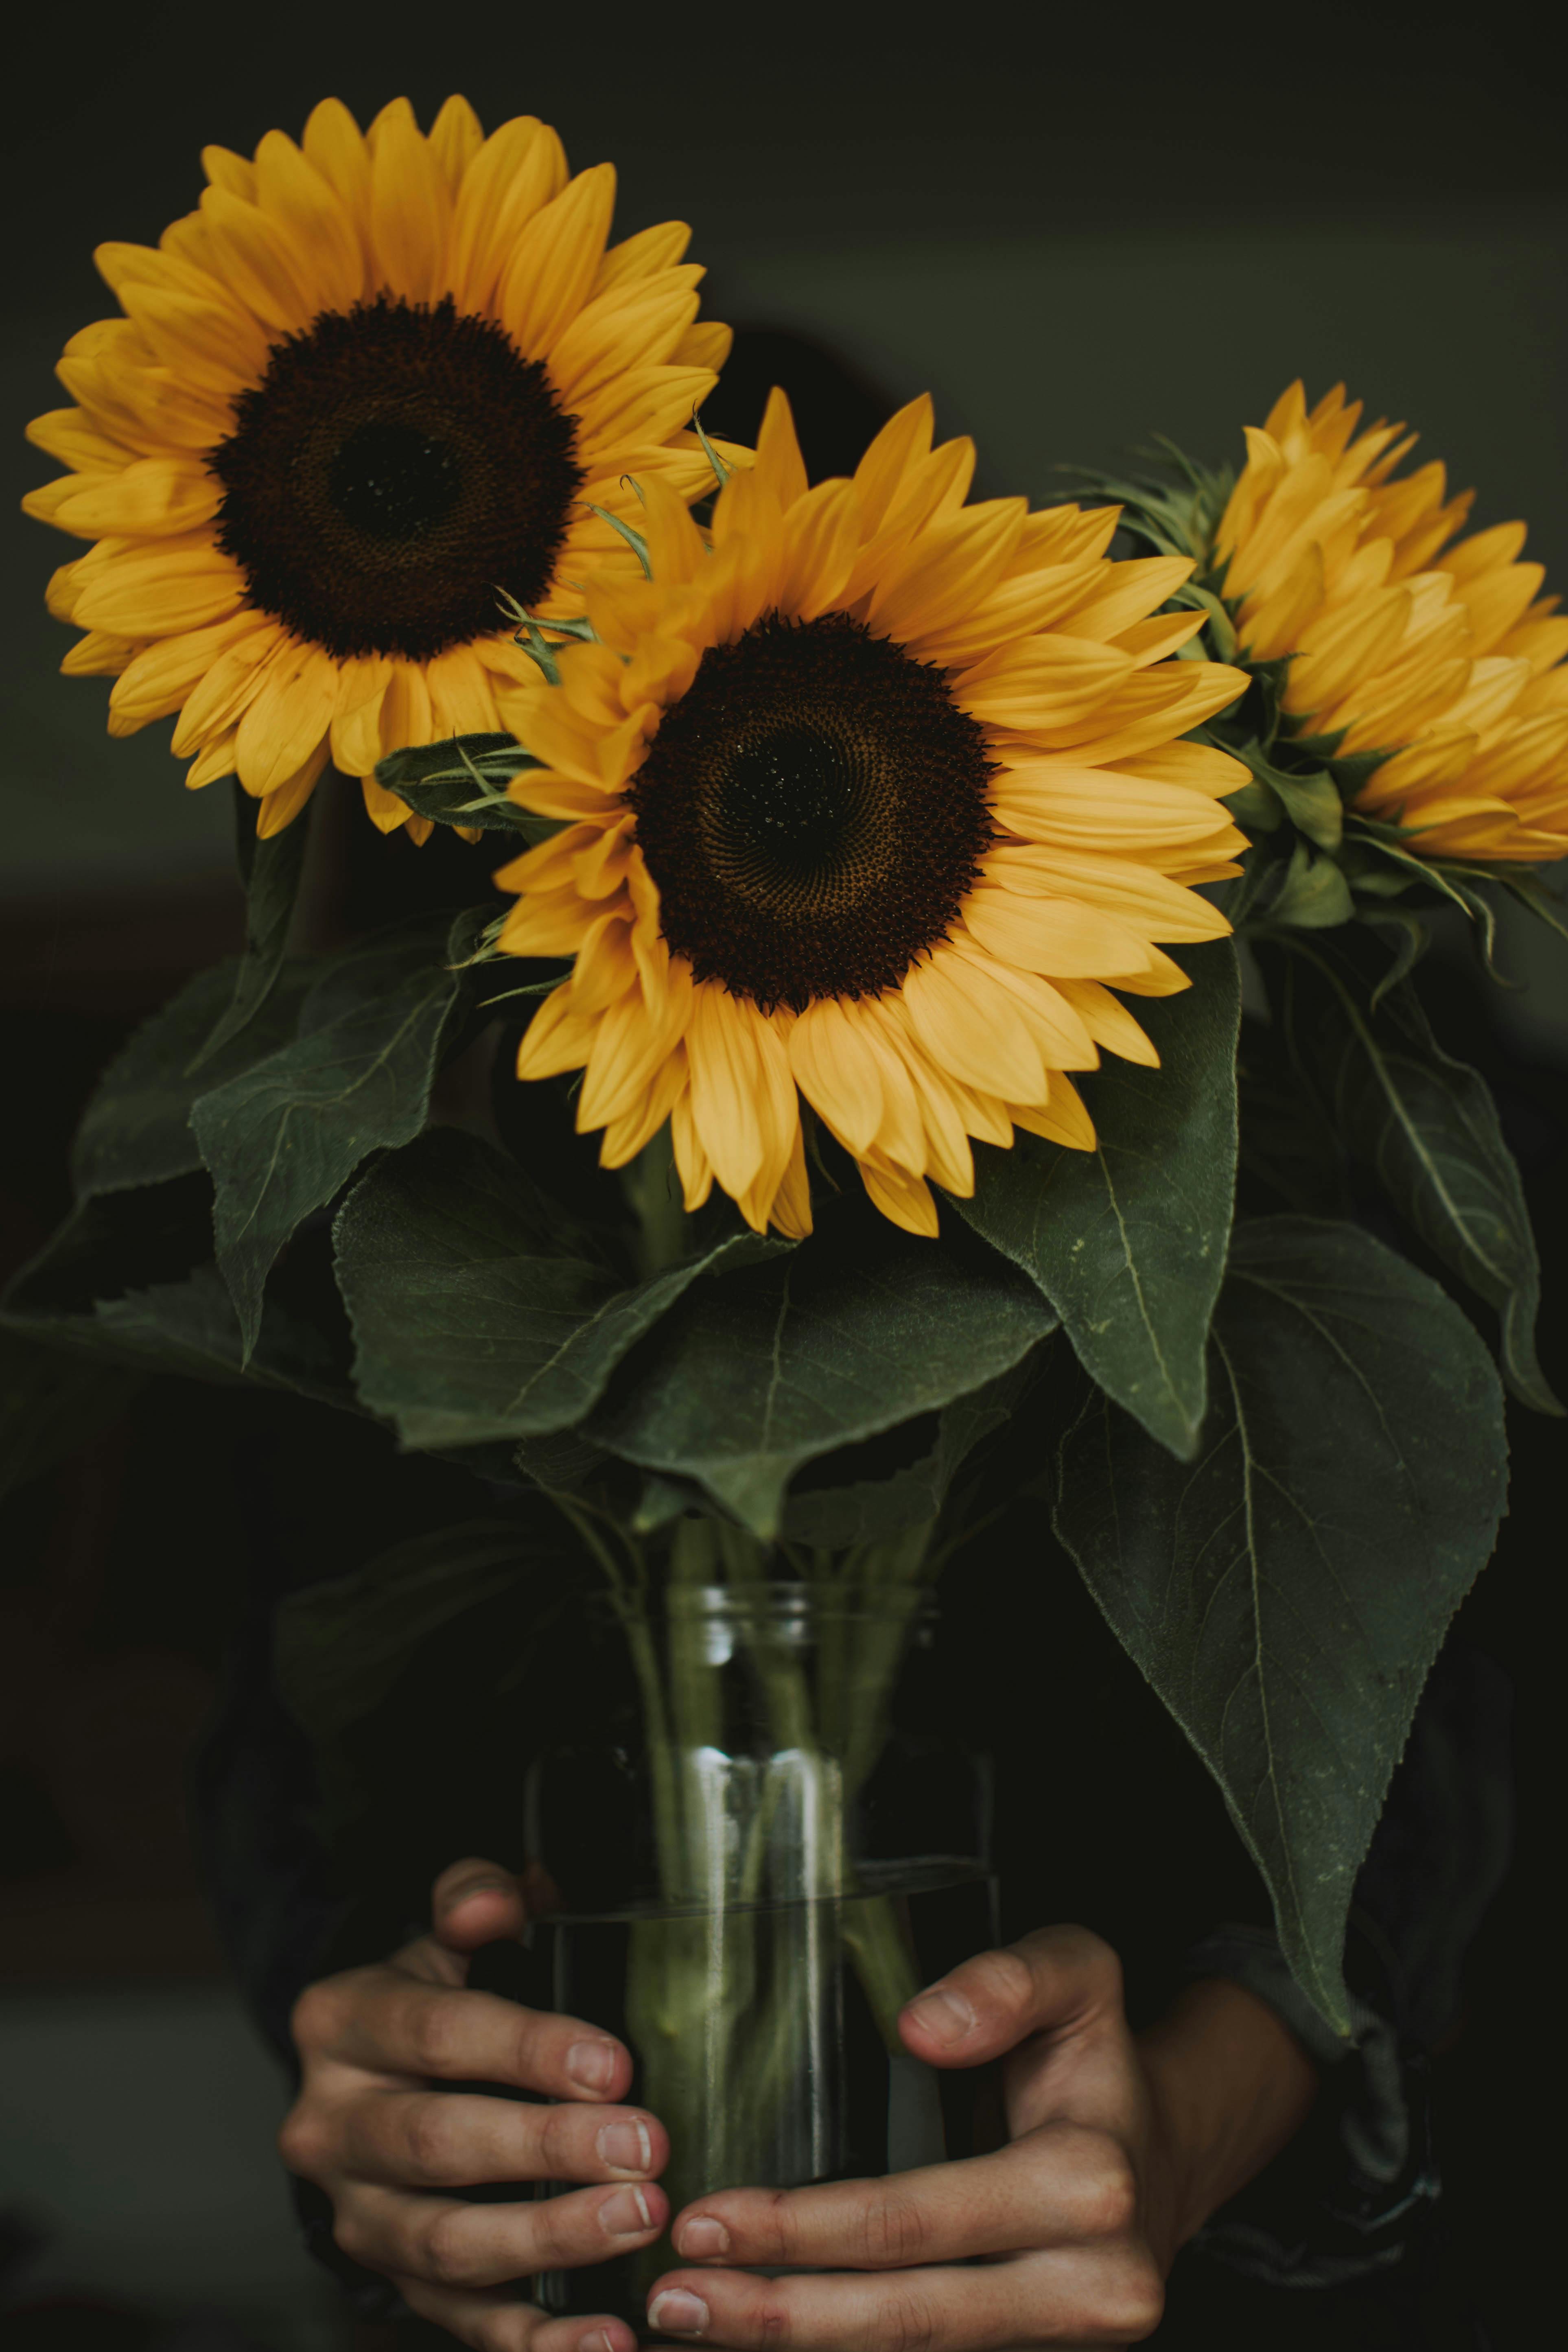 40 Joyful Sunflower Wallpapers for iPhone  The Mood Guide